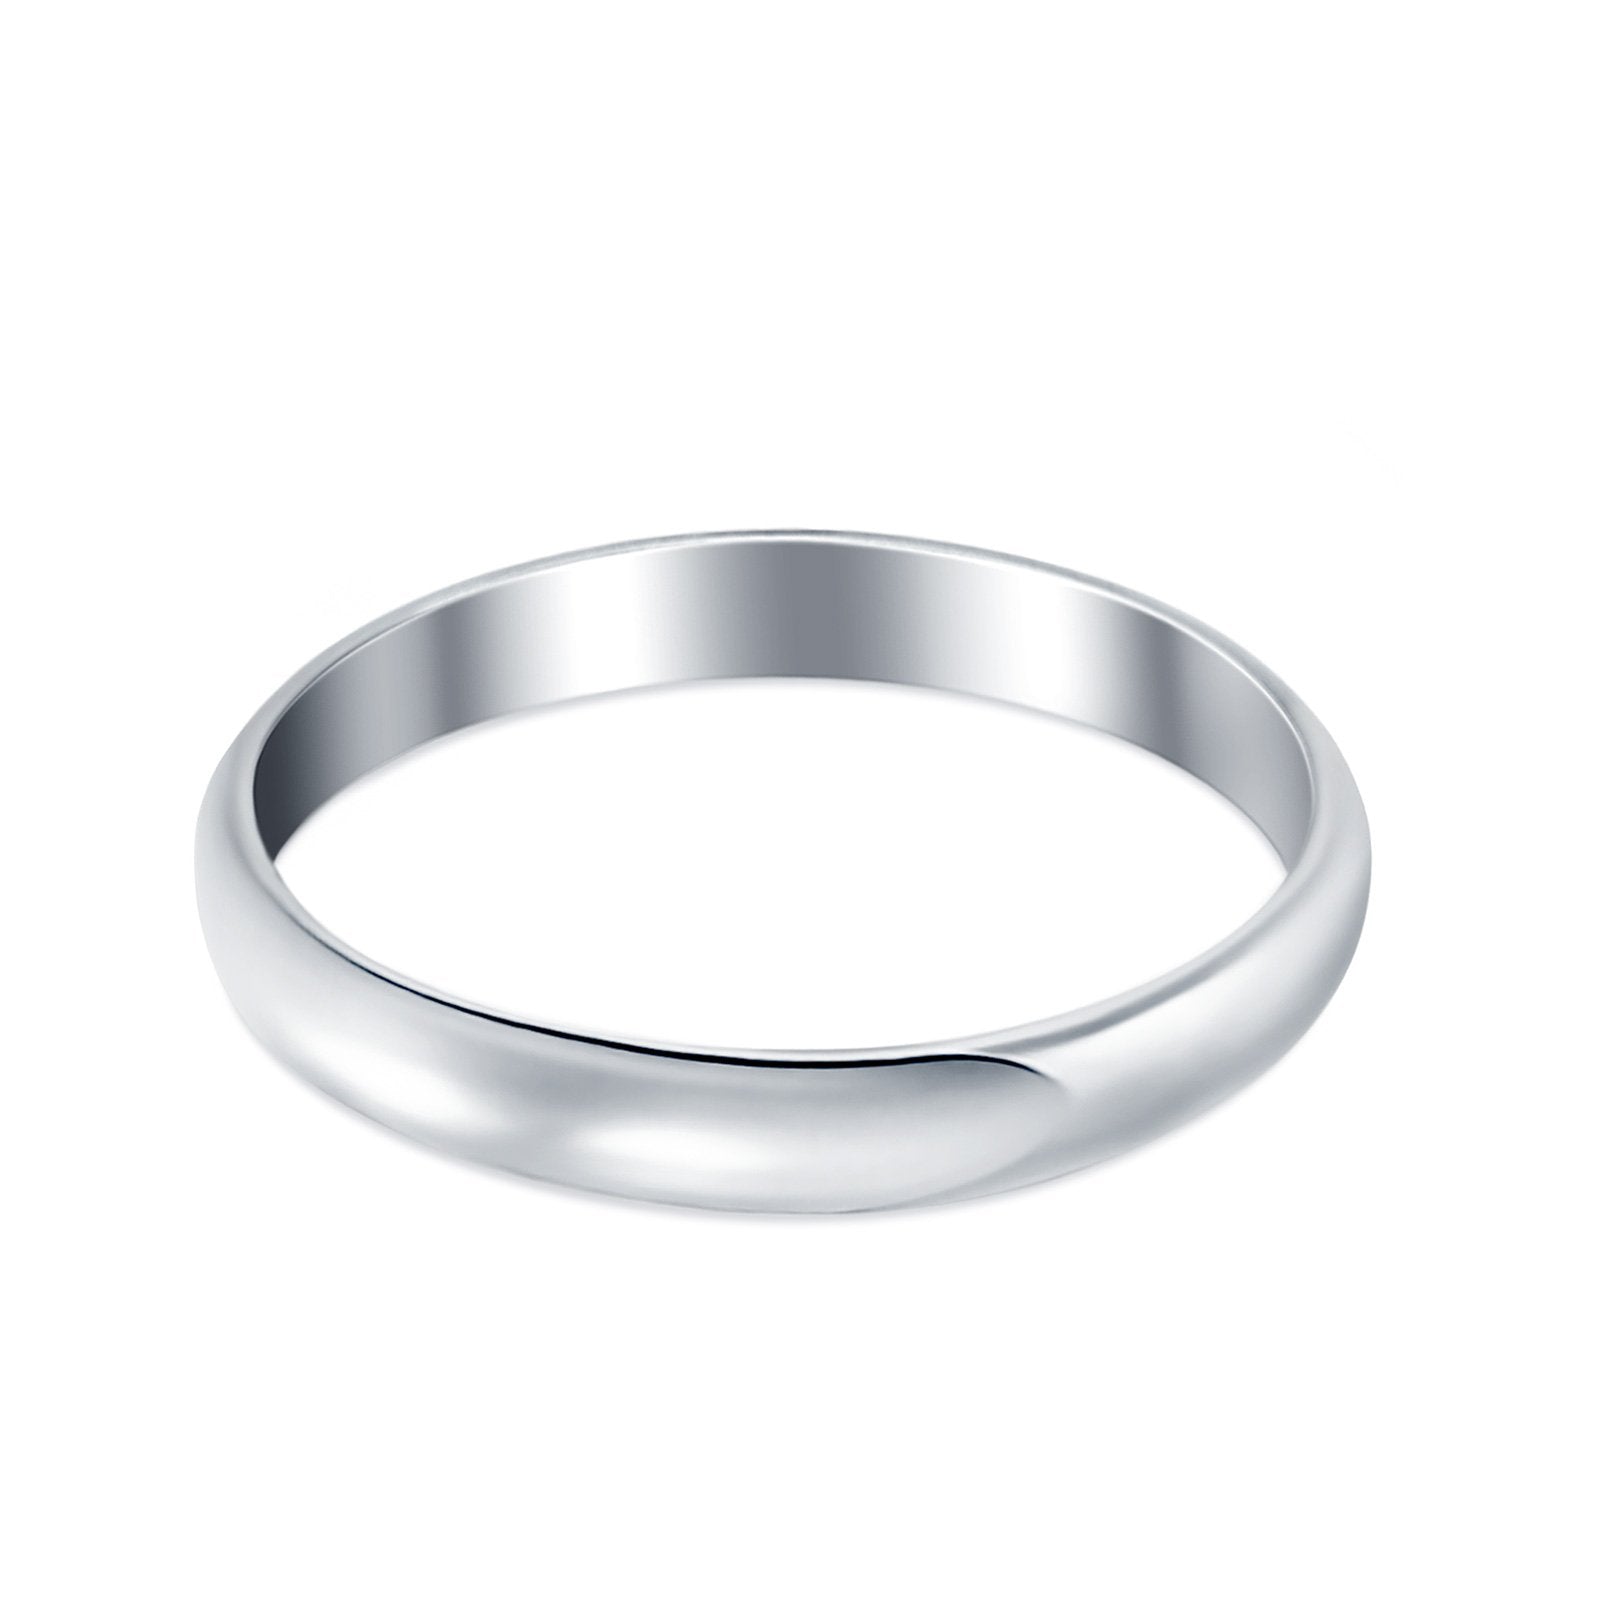 Sterling Silver Wedding Band Ring Round 925 Sterling Silver (3MM)